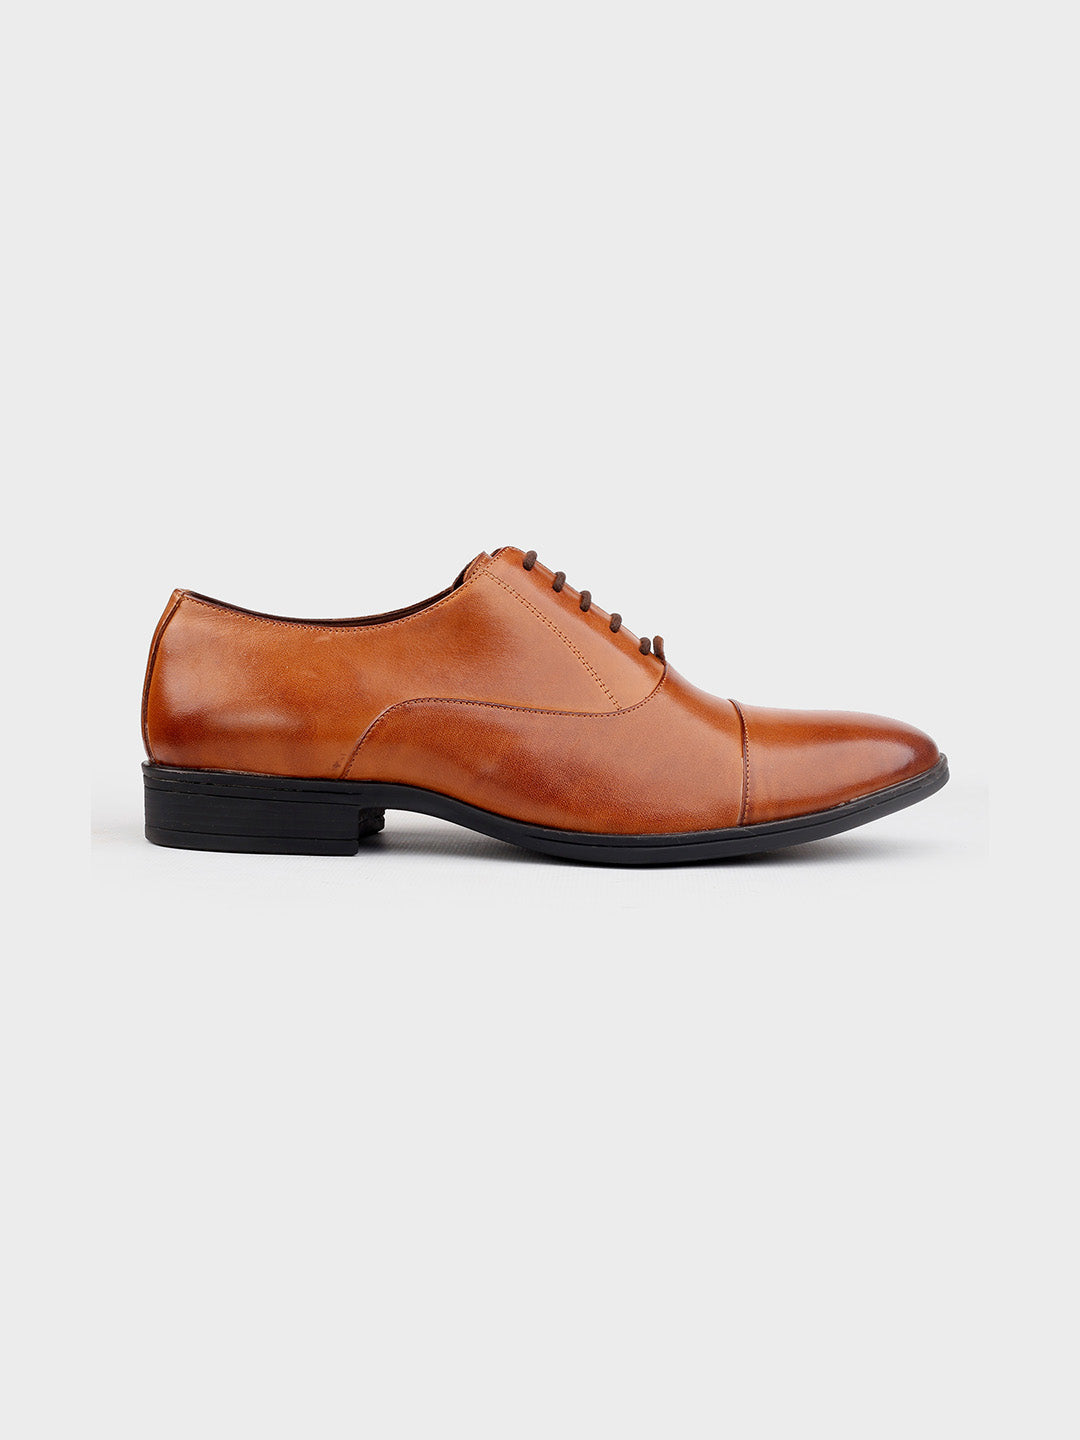 Tan Leather Lace-Up Oxford Shoes